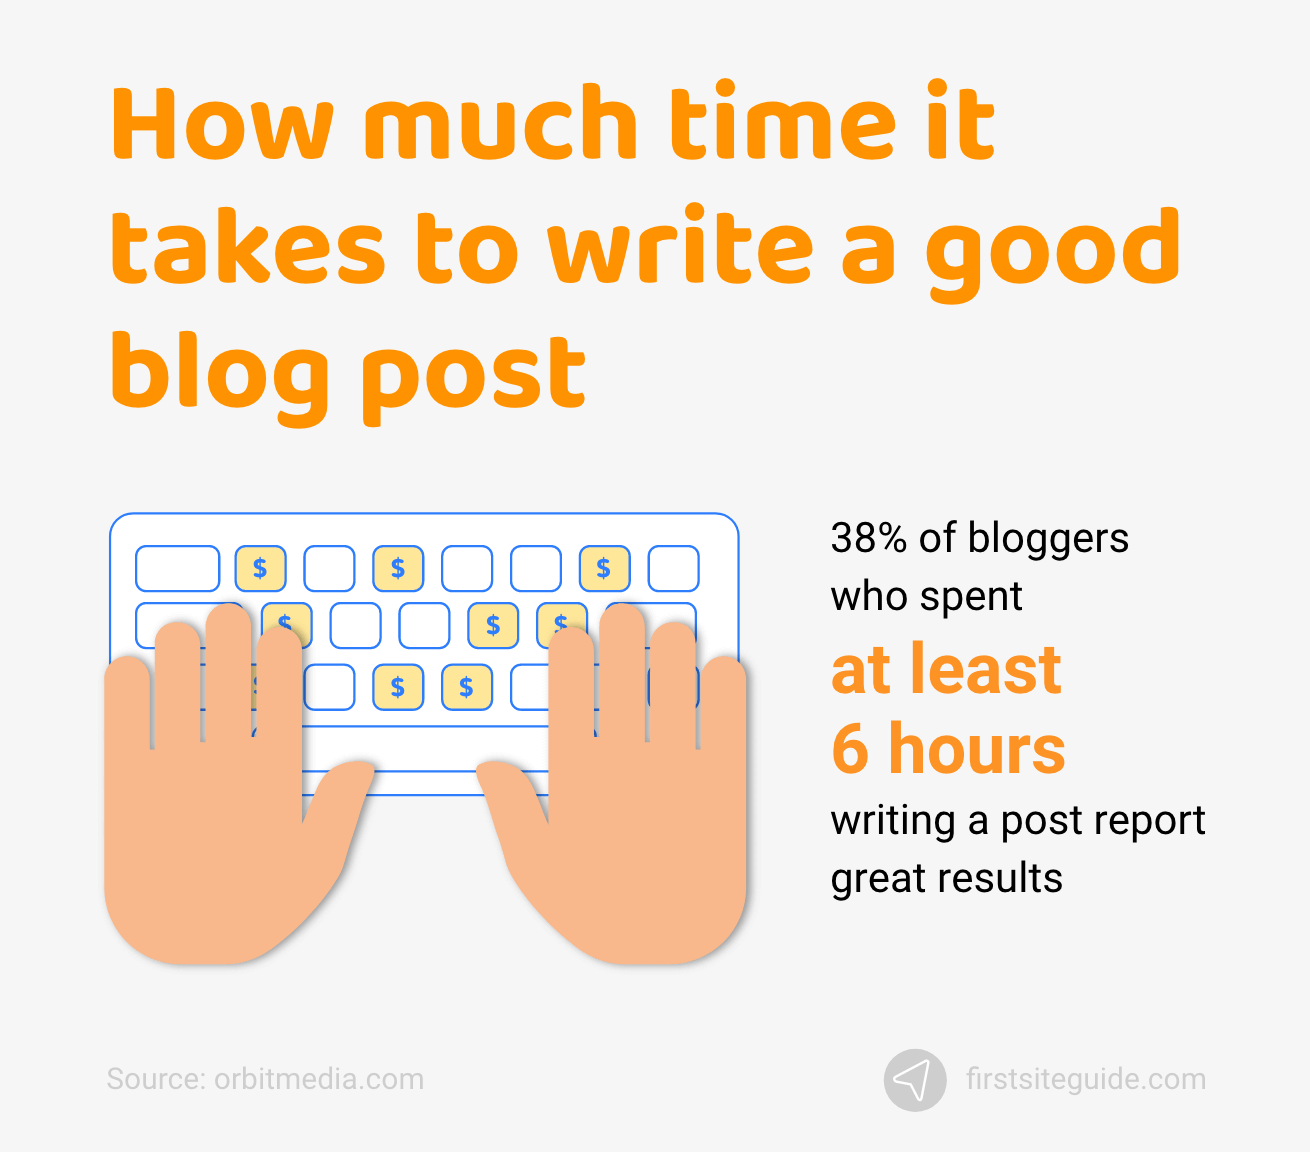 graphic shoes that 38% of bloggers who spent at least 6 hours writing blog posts report great results